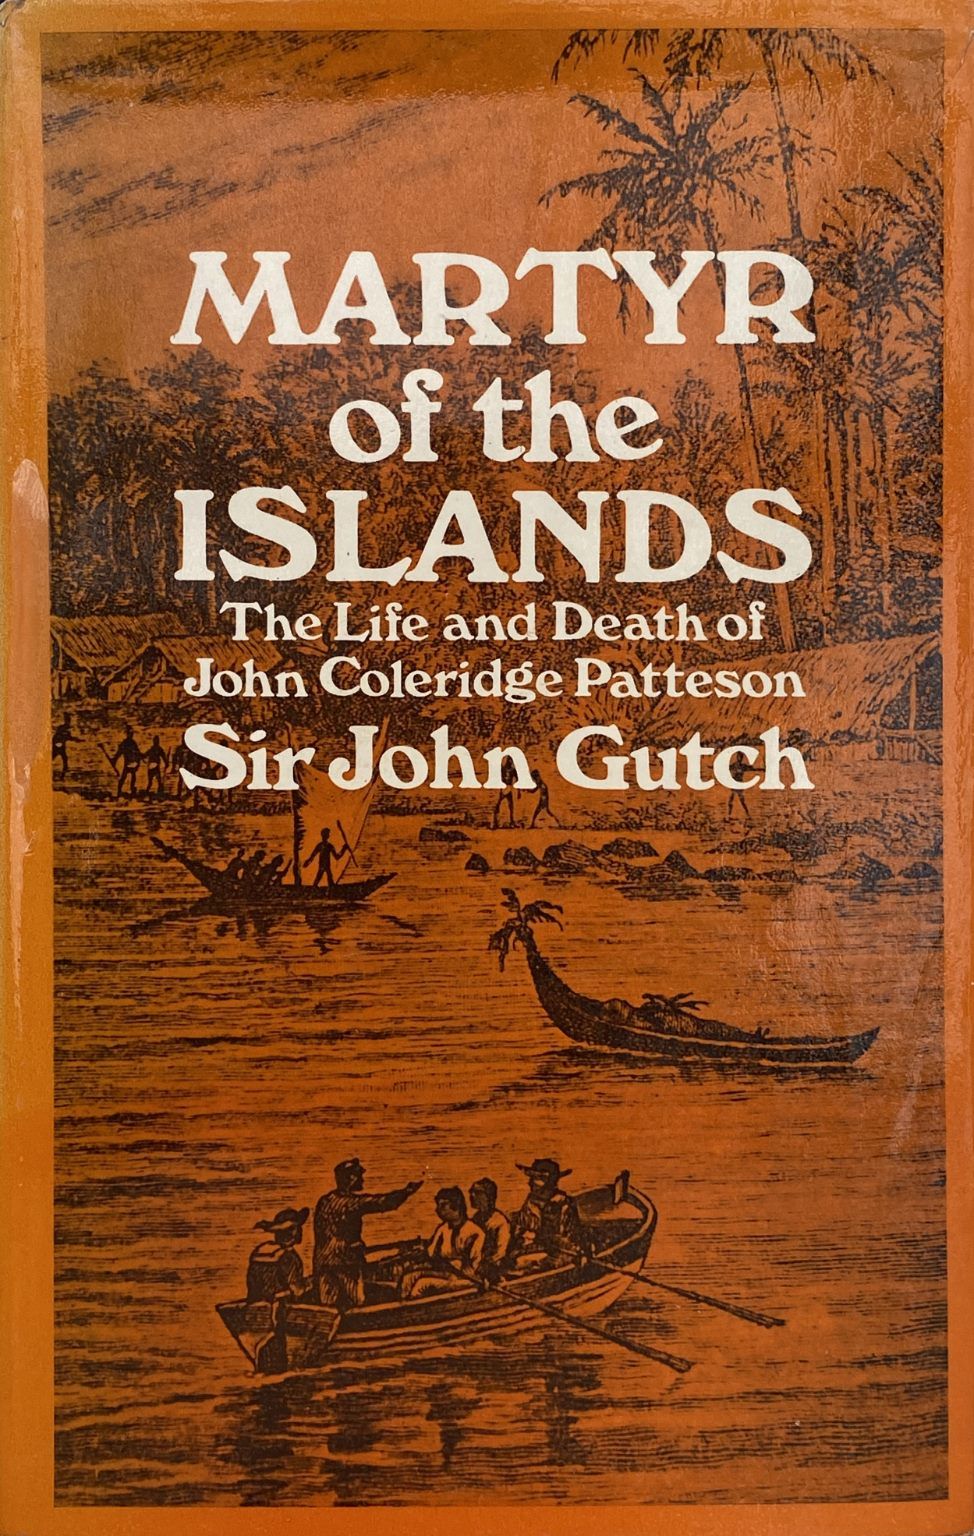 MARTYR OF THE ISLANDS: The Life and Death of John Coleridge Patteson